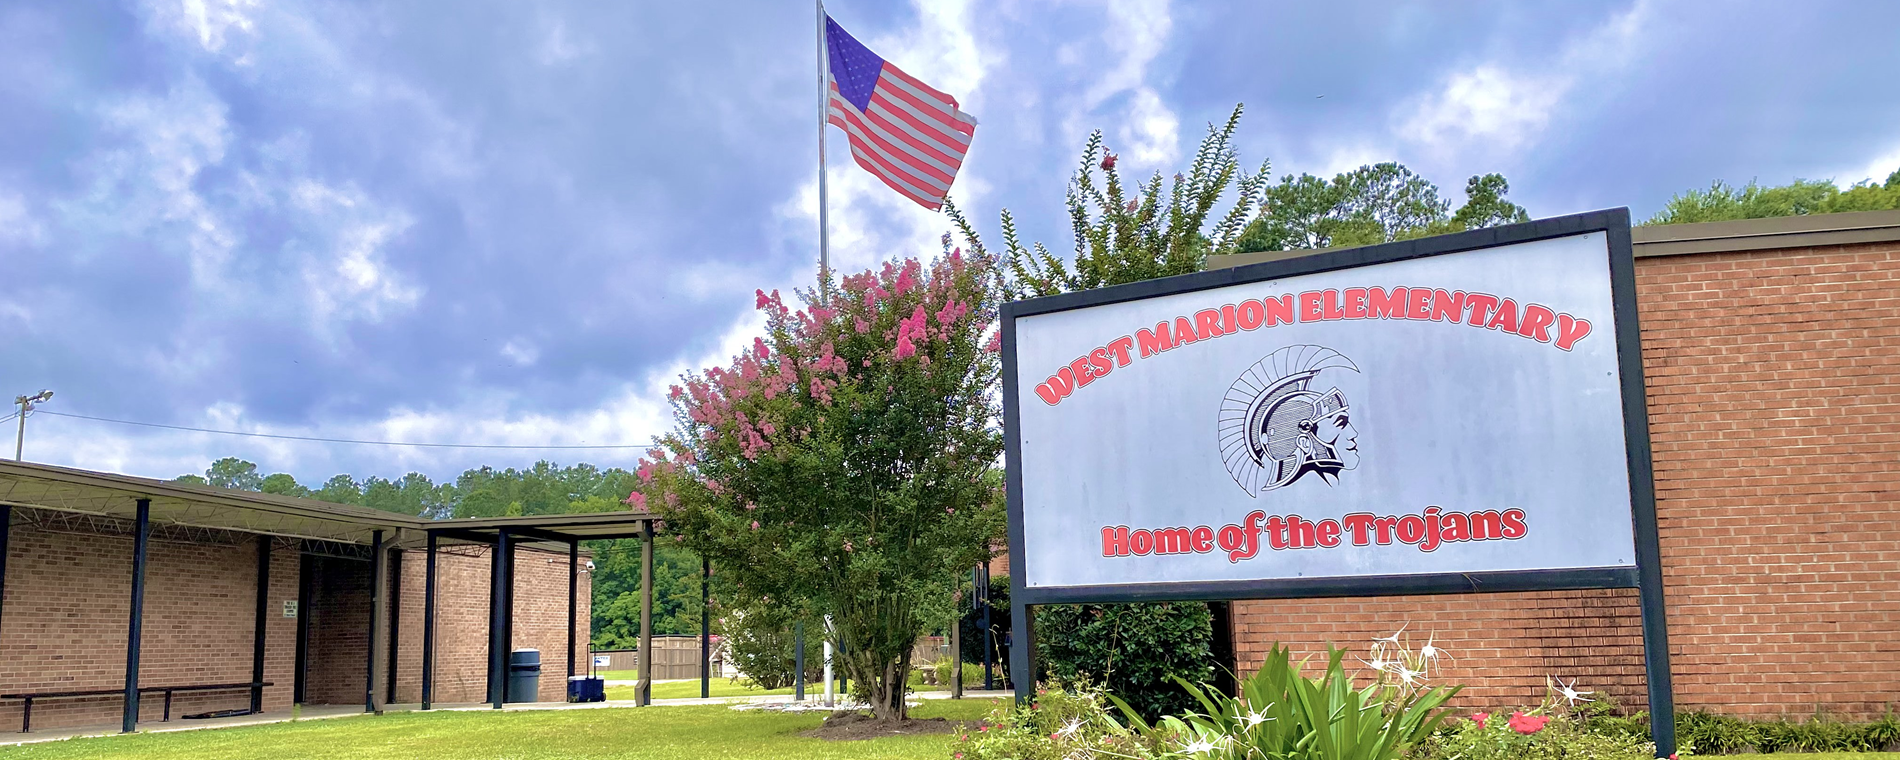 West Marion Elementary